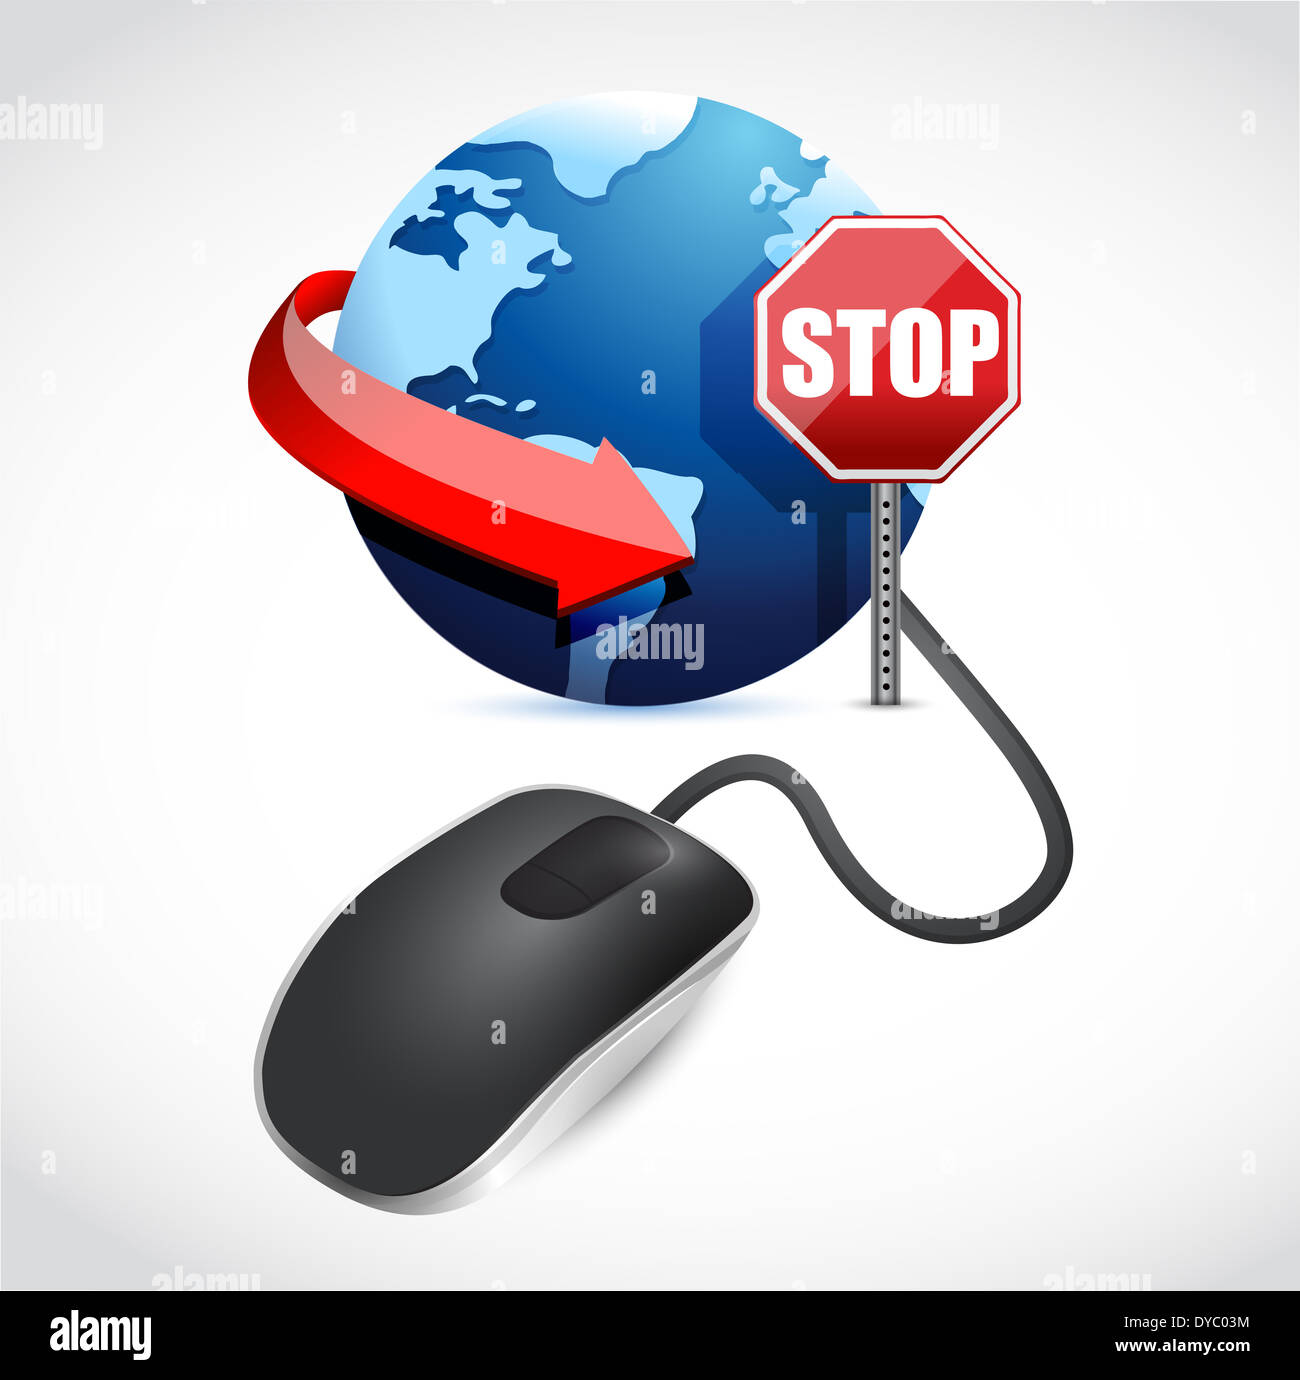 browsing is blocked by a stop sign illustration design Stock Photo